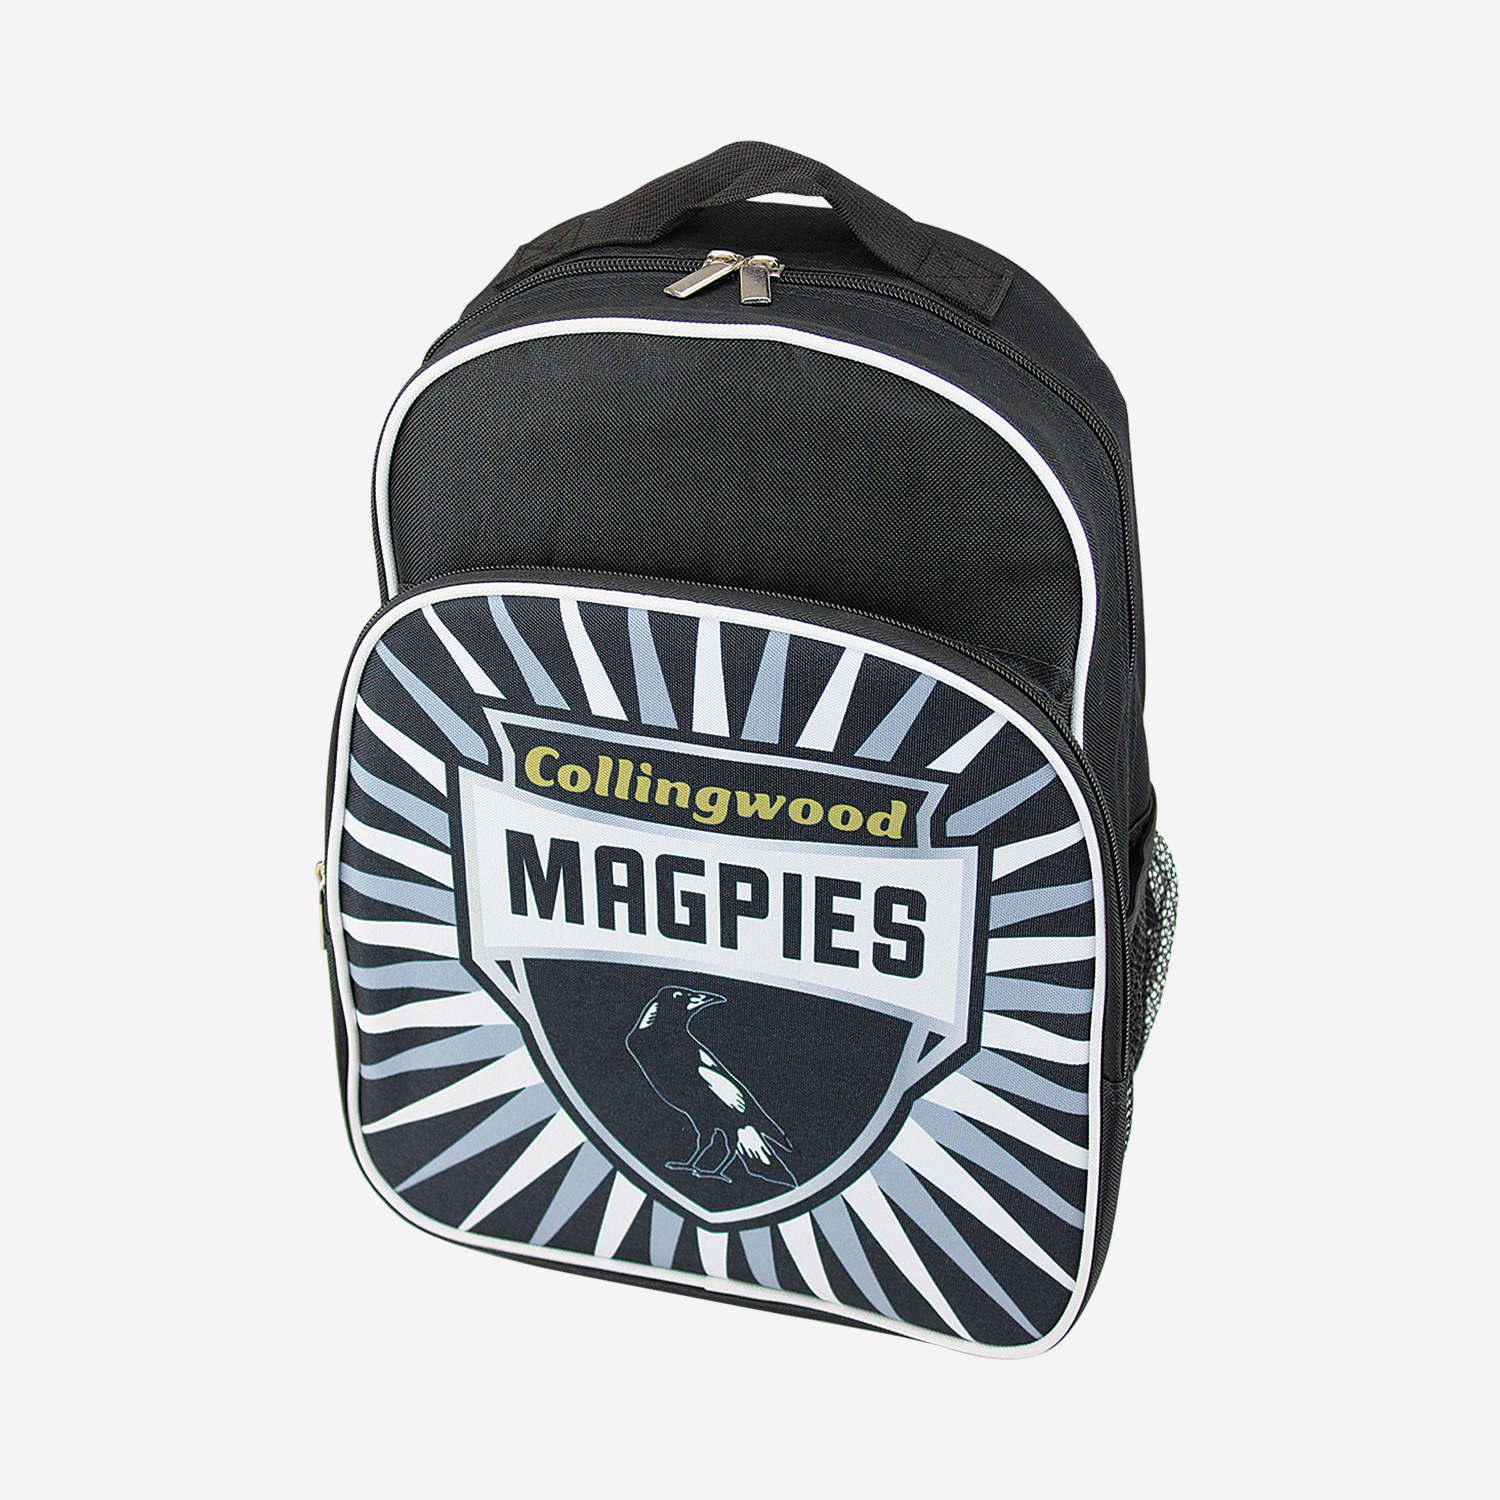 Pies Shield Backpack